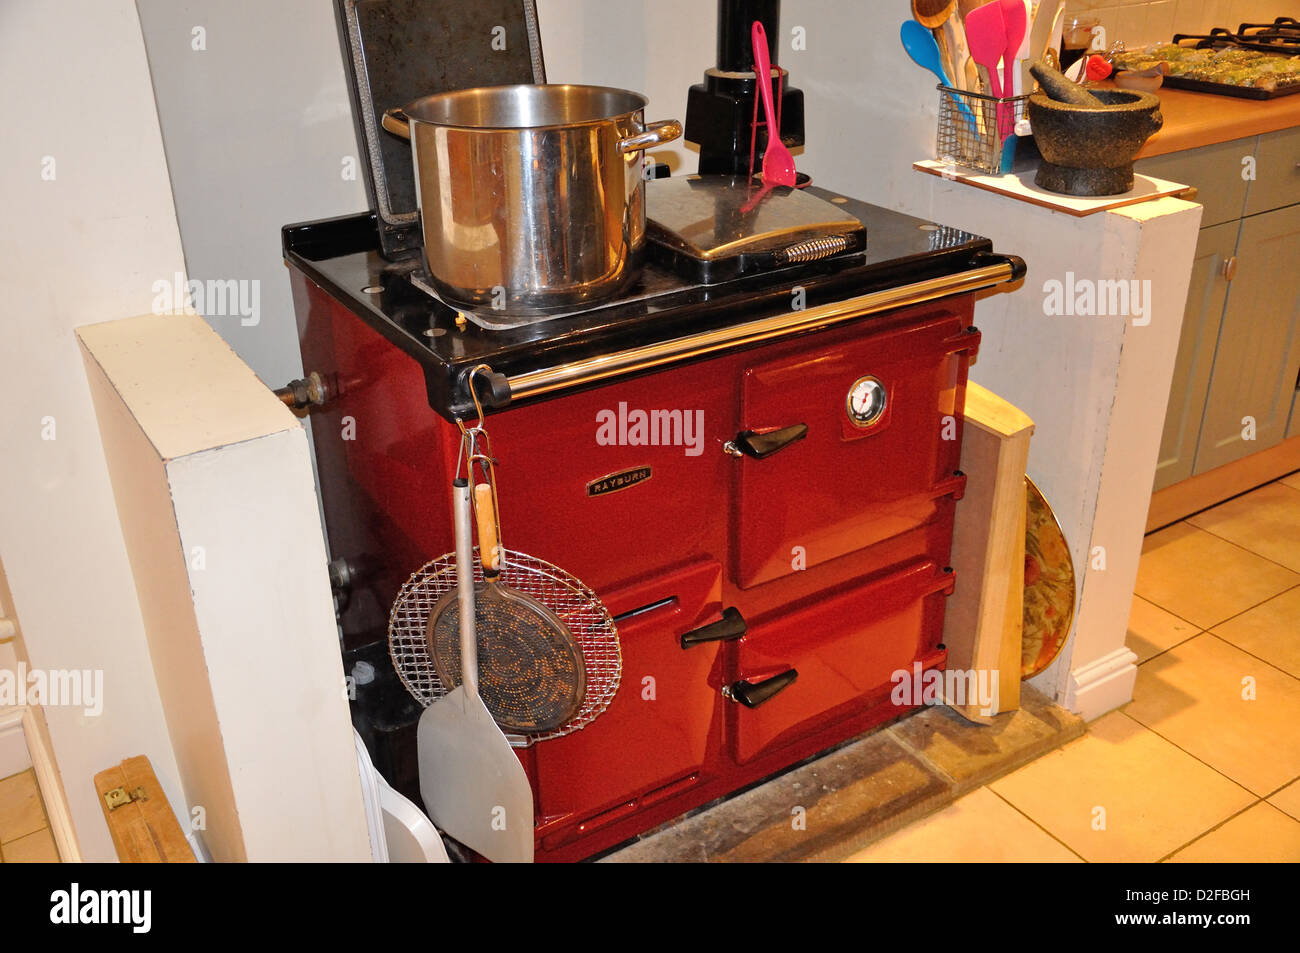 Rayburn cast iron oven in country house kitchen, Sandford on Thames, Oxfordshire, England, United Kingdom Stock Photo